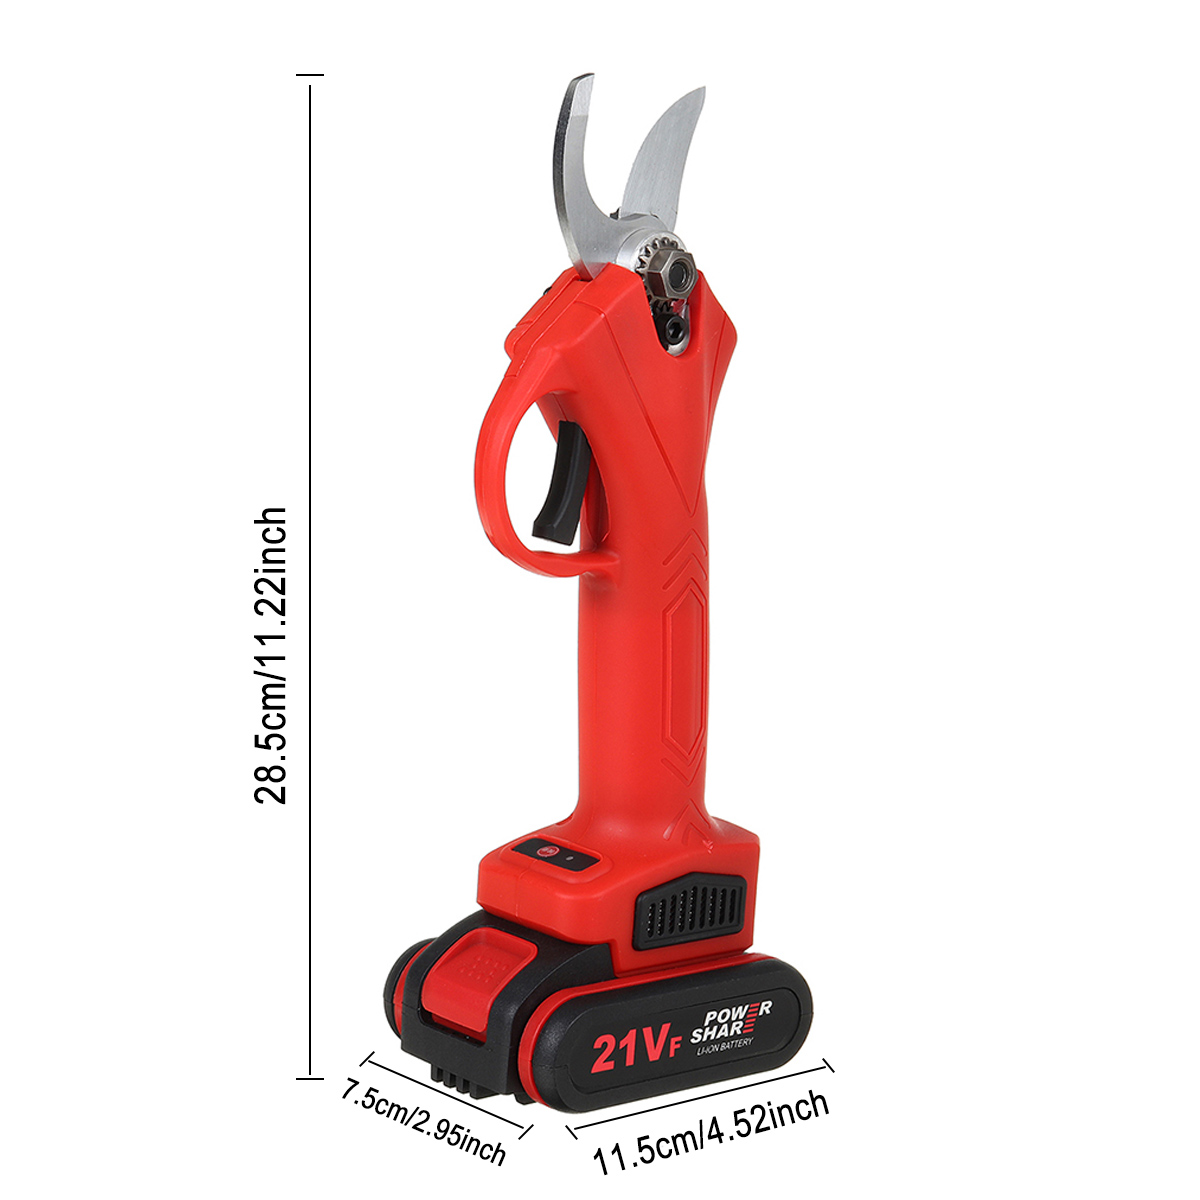 21V-Wireless-25mm-Rechargeable-Electric-Scissors-Branch-Pruning-Shear-Tree-Cutting-Tools-W-1-Battery-1749245-6